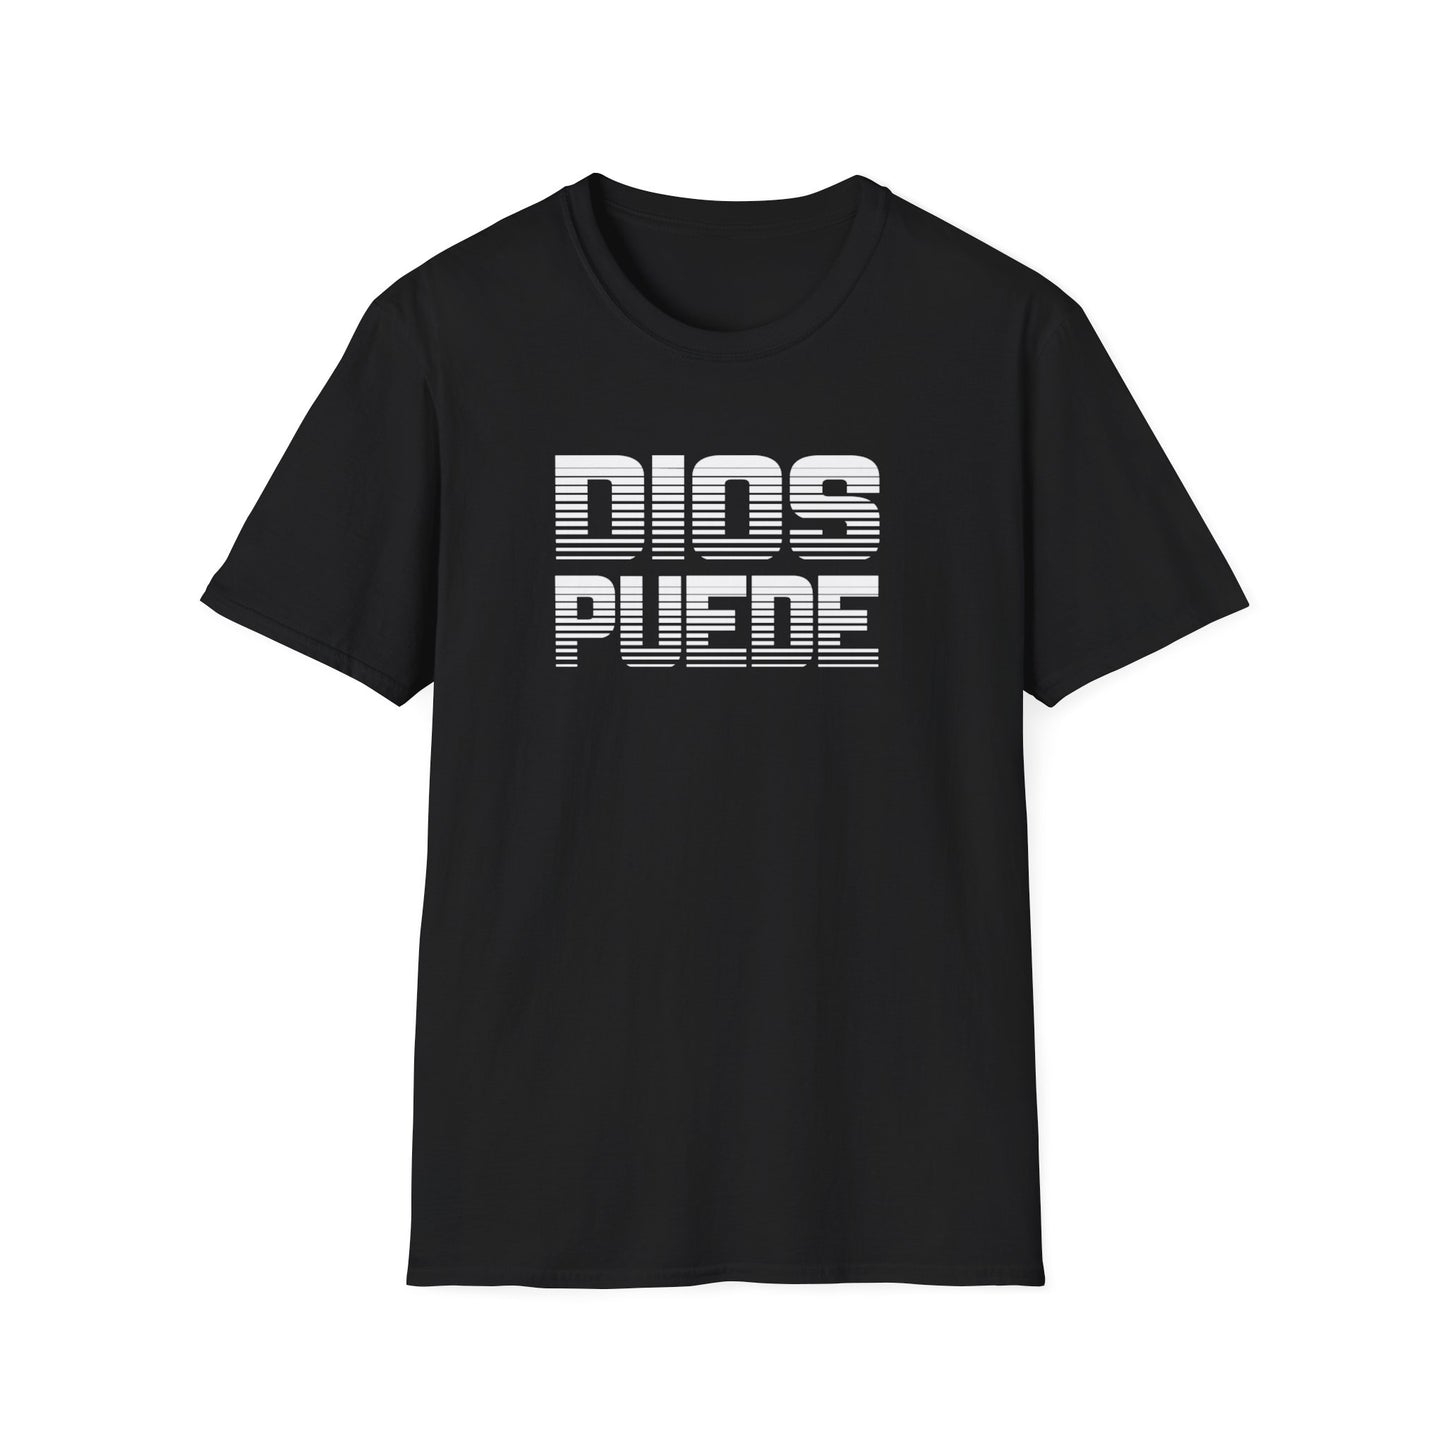 Dios Puede Unisex and V-Neck T-shirt in 3 Color Options